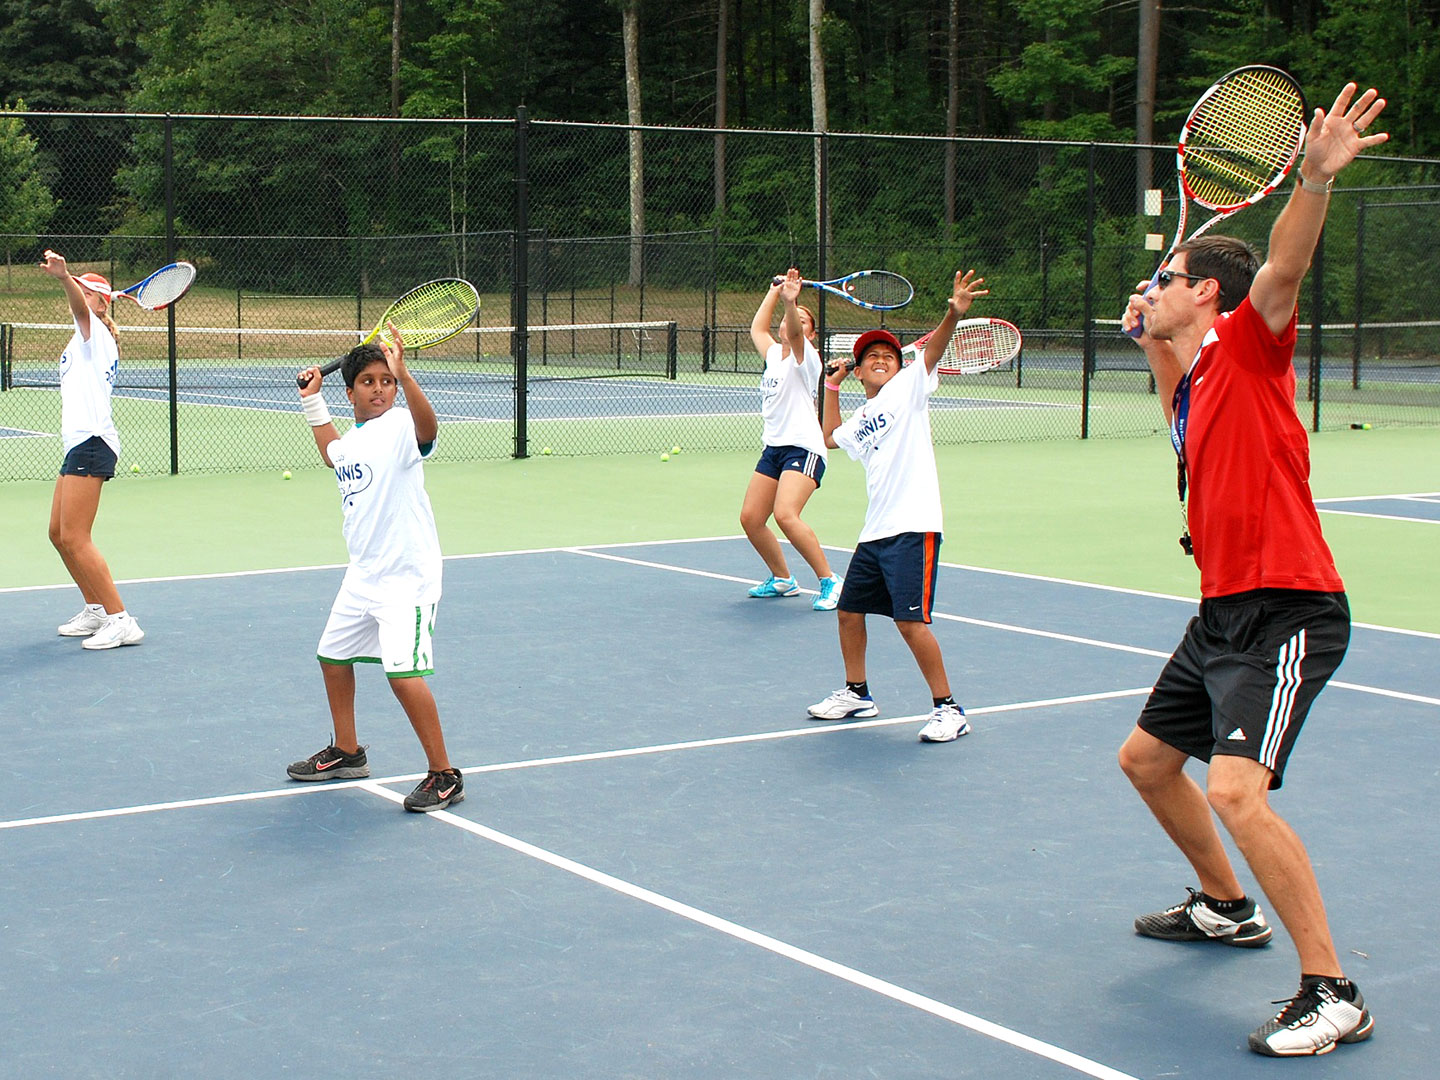 Tennis camp drills for boys and girls